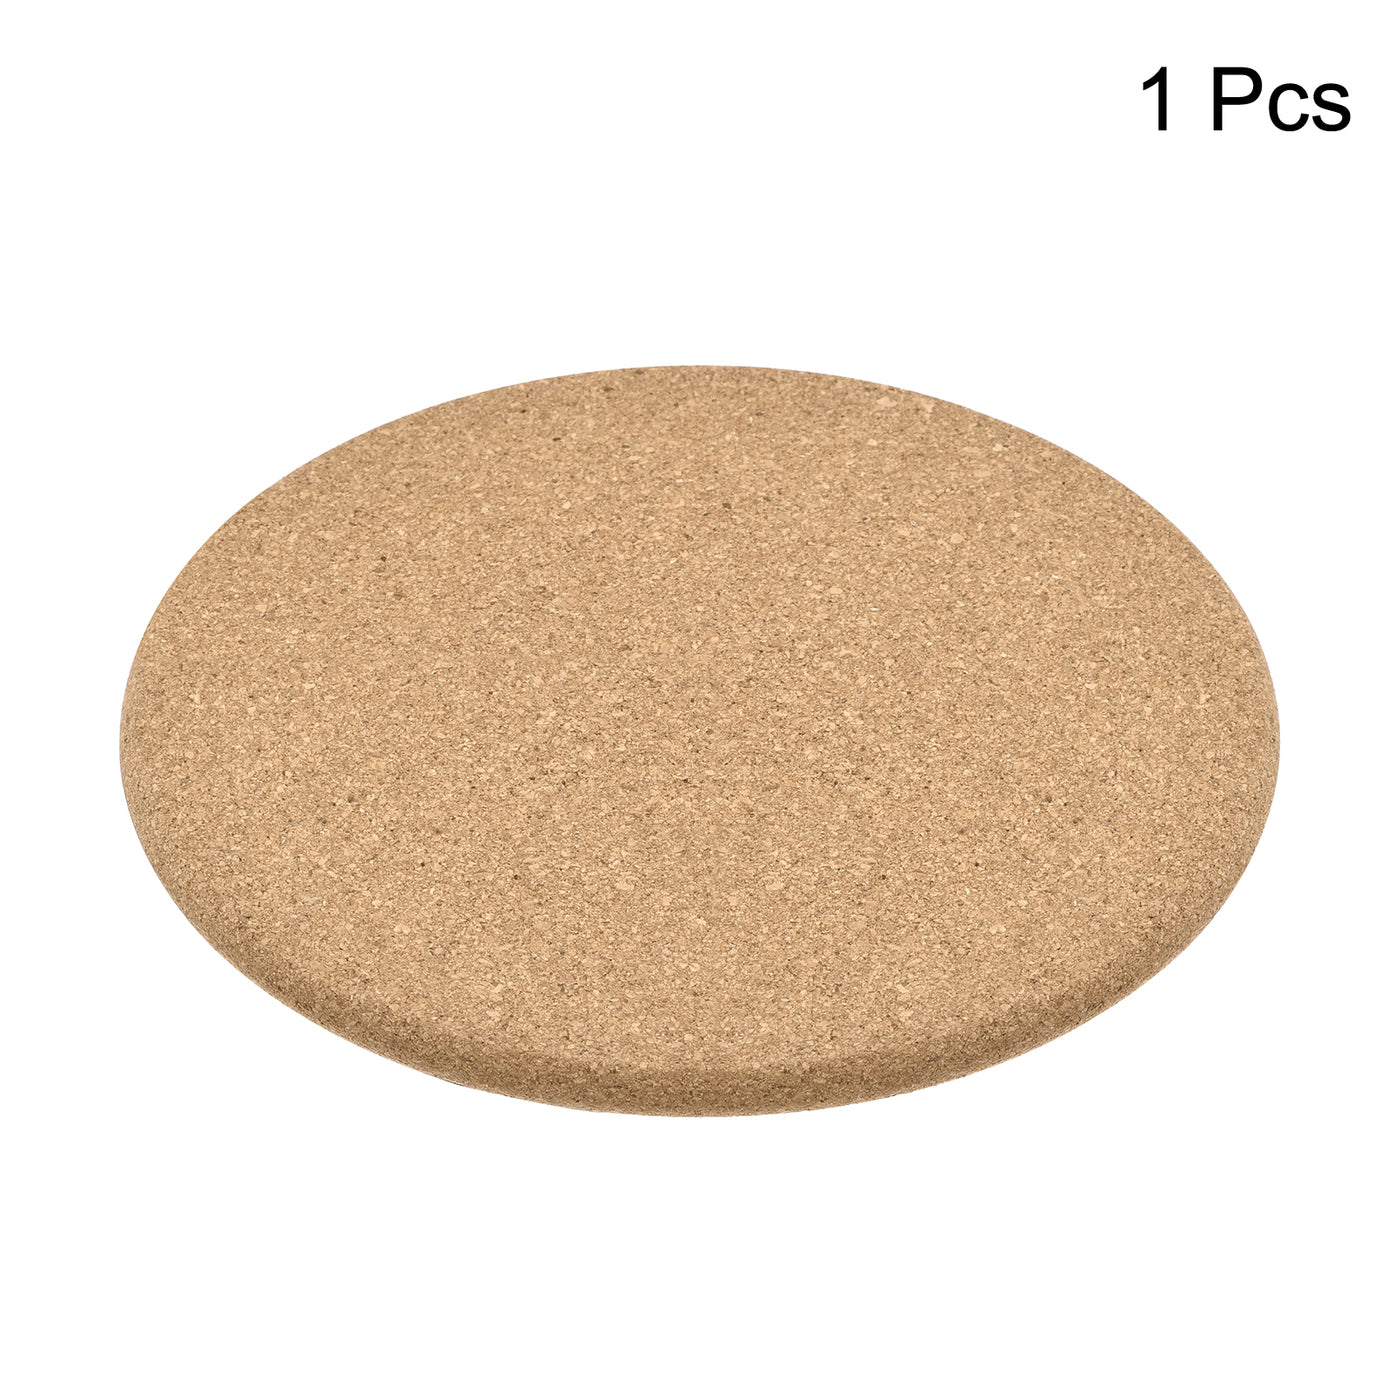 uxcell Uxcell 160mm(6.3") Round Coasters 10mm Thick Cork Cup Mat Pad Round Edge